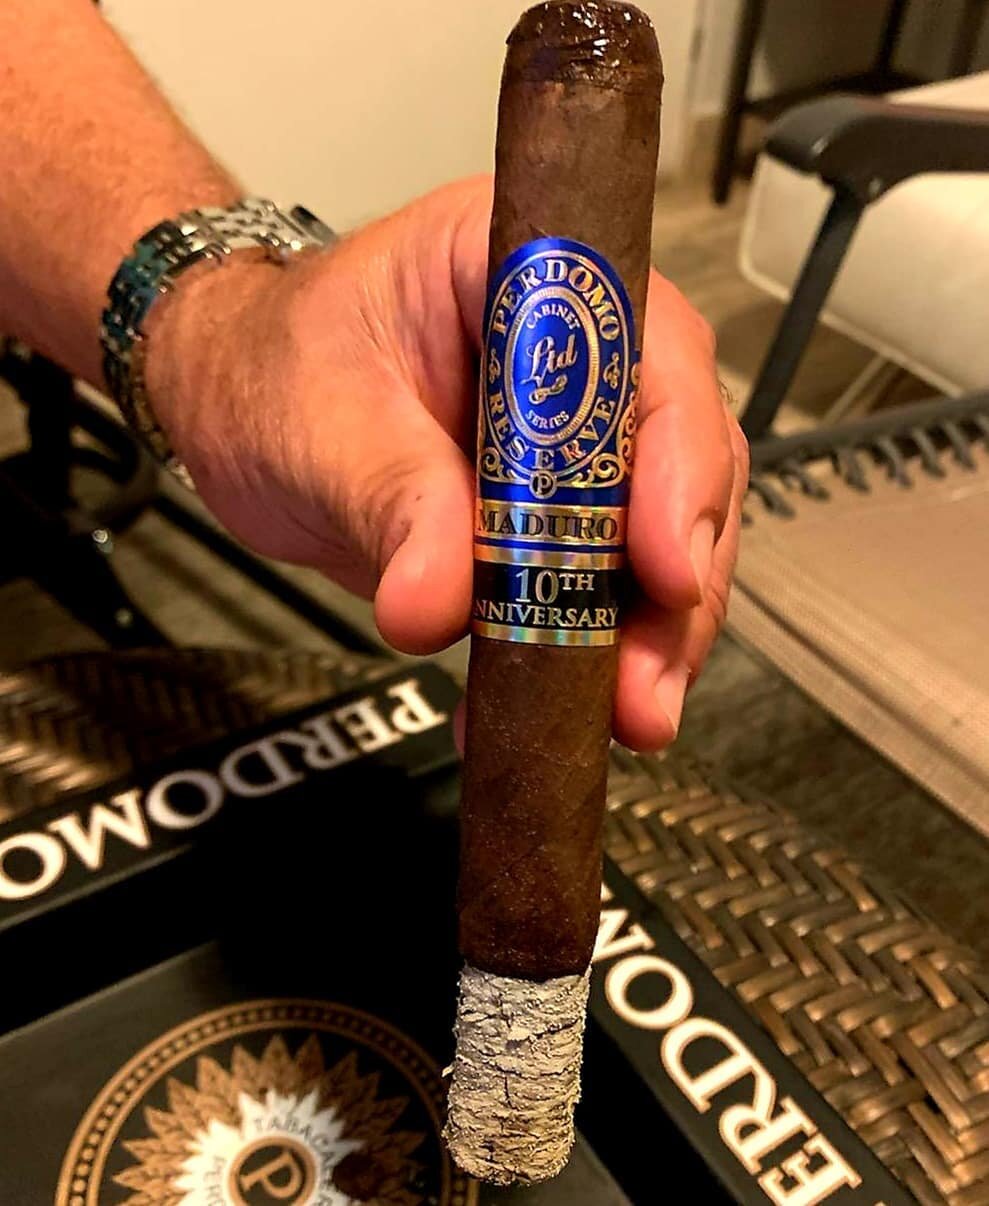 The new #Perdomo Reserve 10th Anniversary Maduro, all that I can say is Wow!!! Have you tried them? #perdomocigars #smokeperdomo #perdomoarmy #perdomoreserve #cigar #cigars